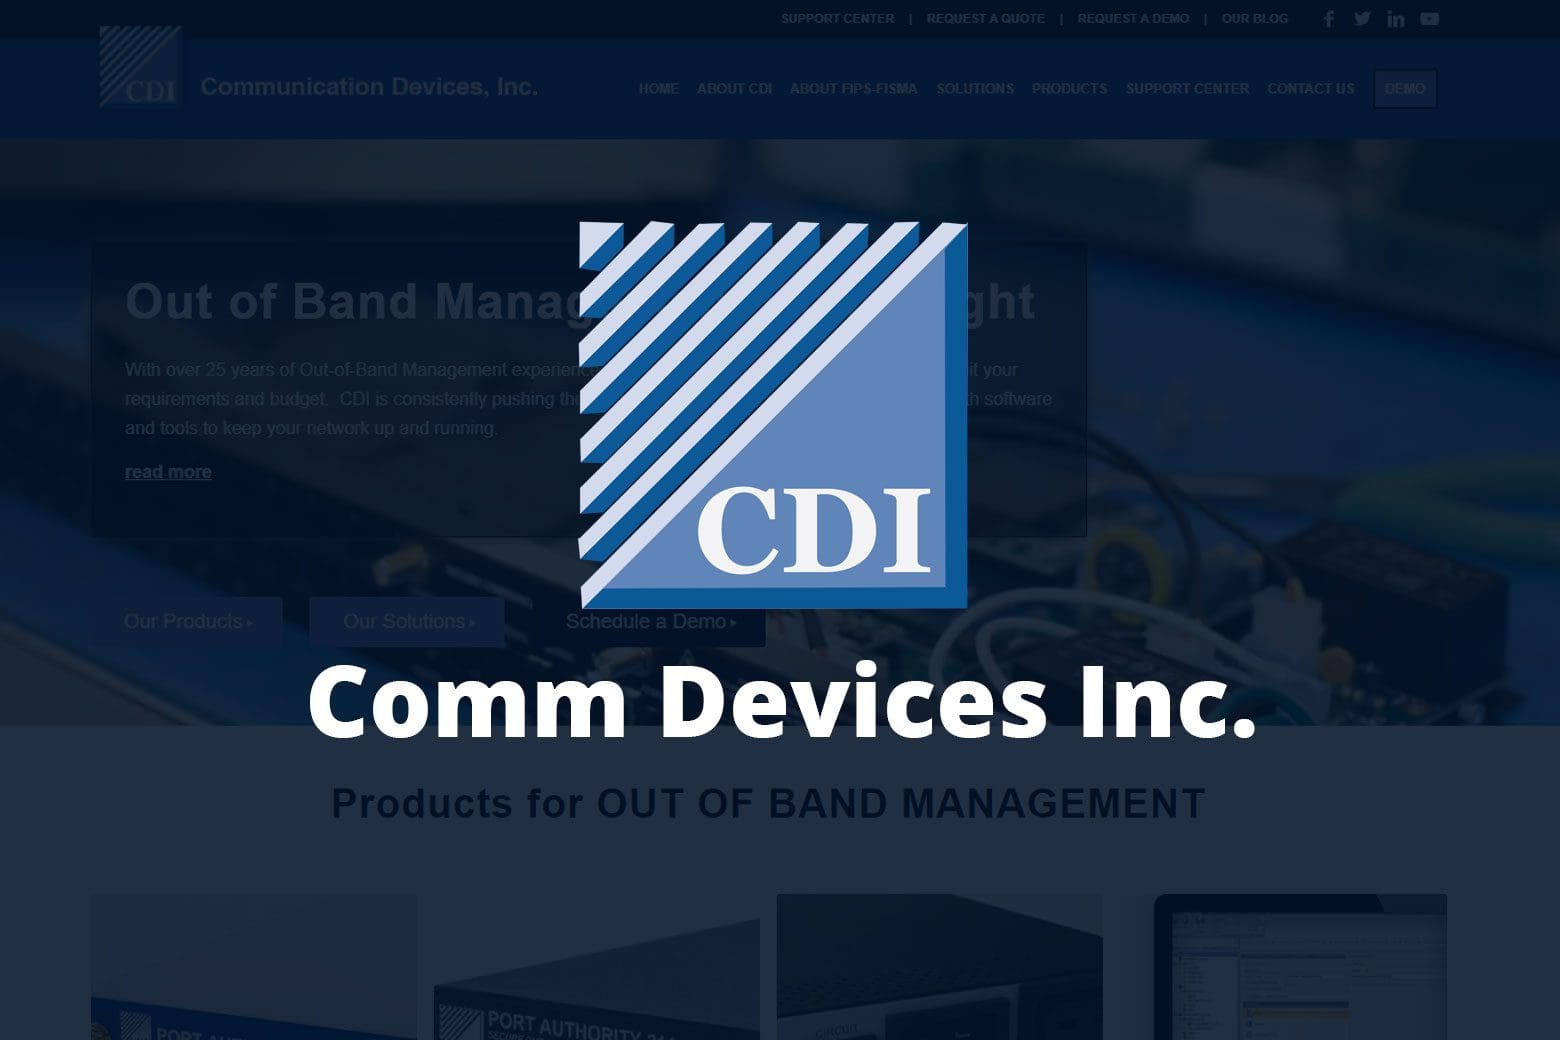 Comm Devices Inc